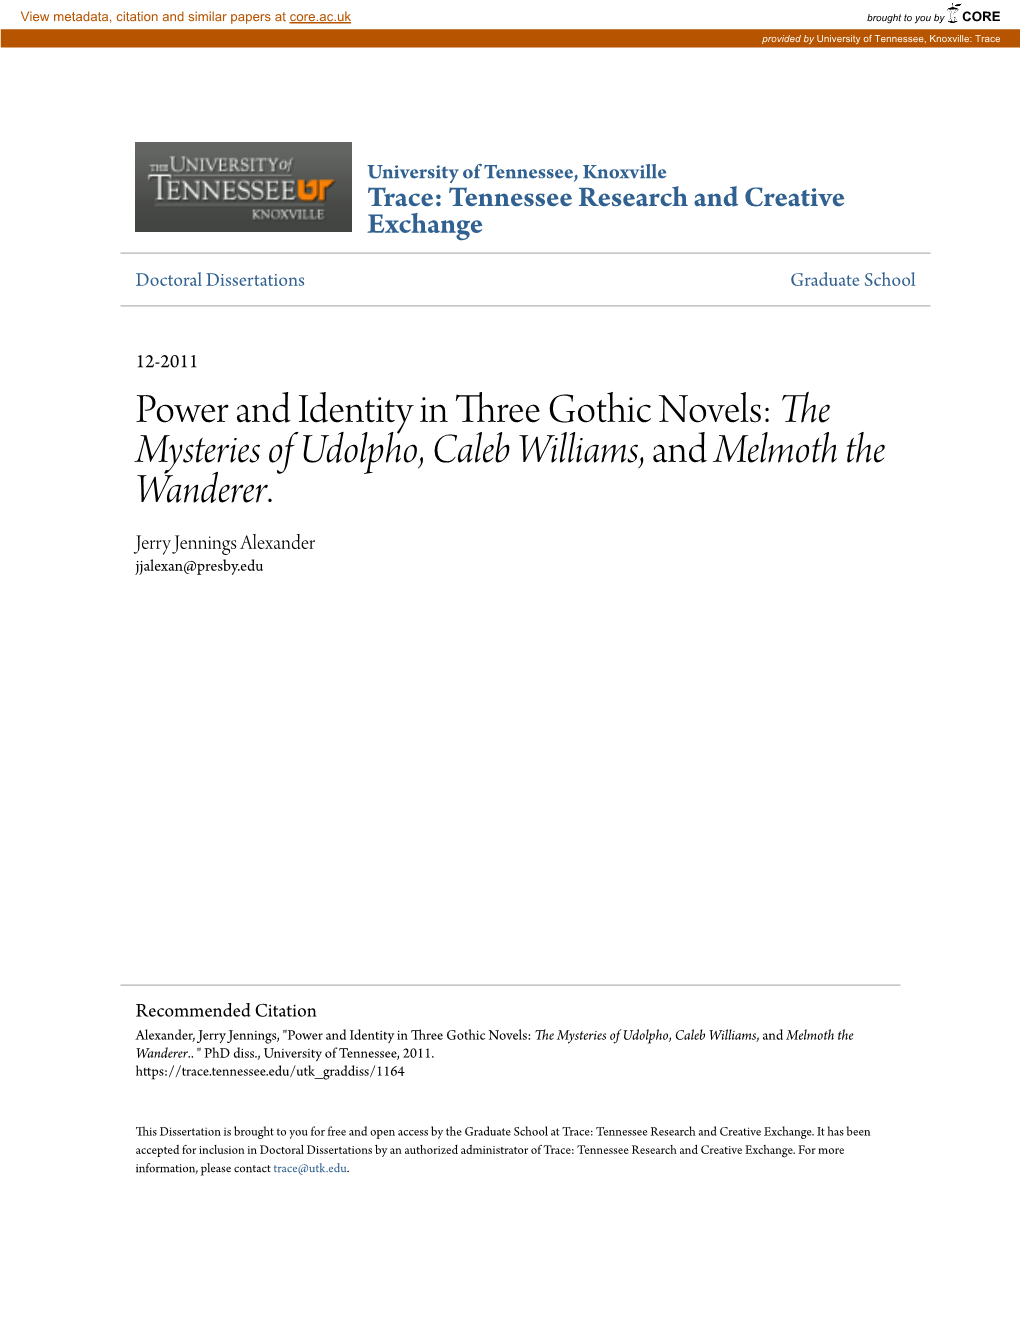 Power and Identity in Three Gothic Novels: &lt;I&gt;The Mysteries Of